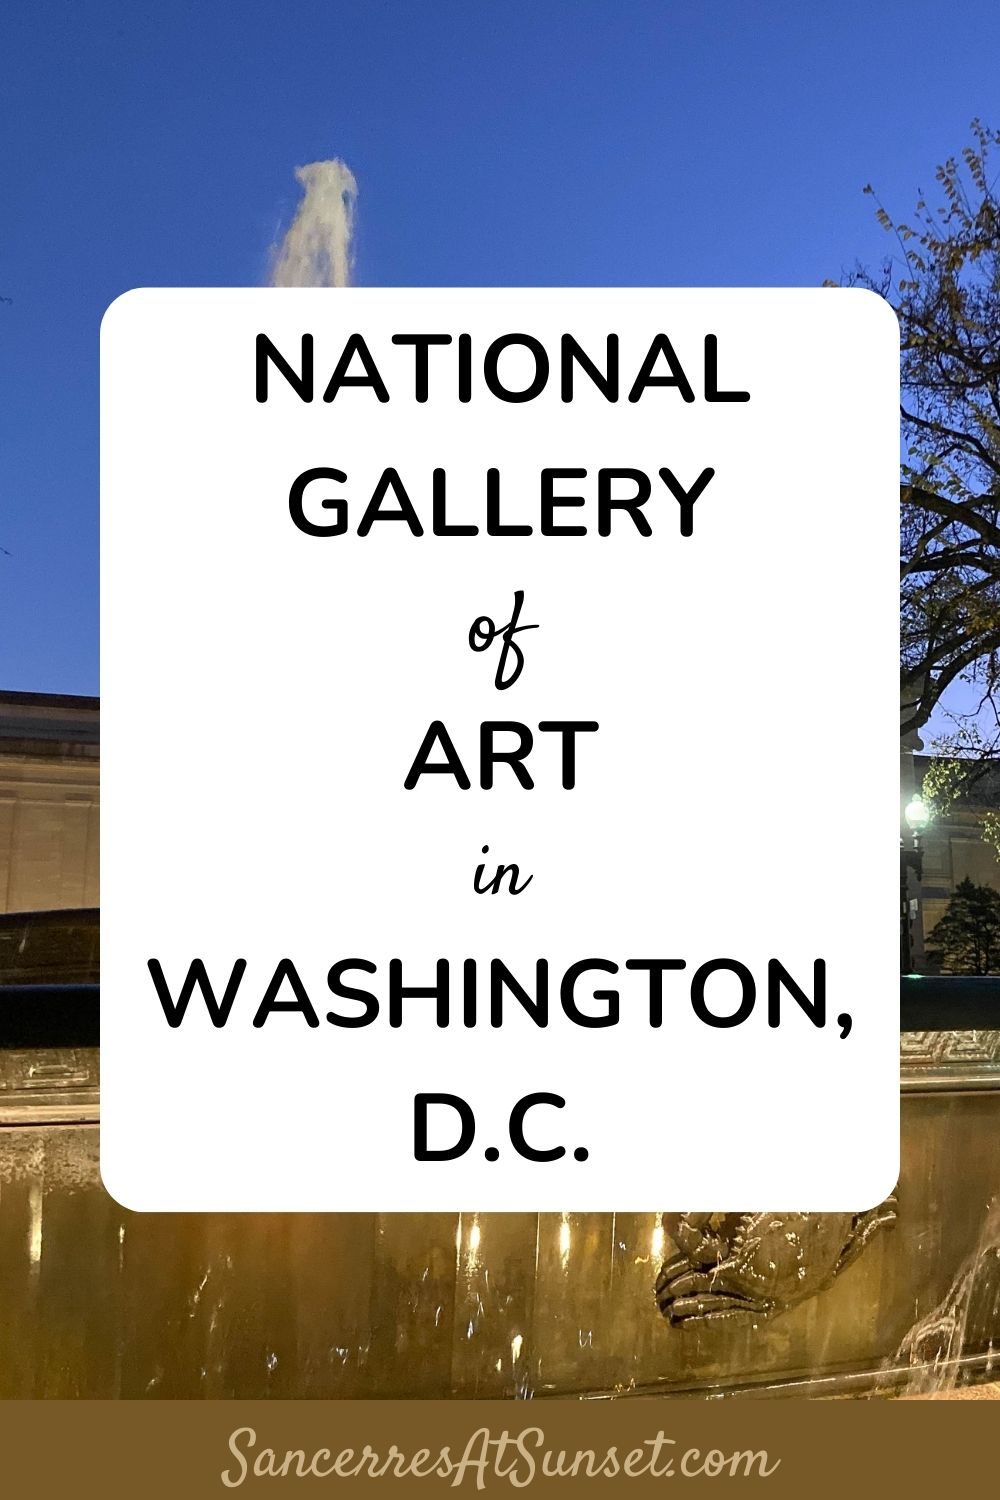 National Gallery of Art in Washington, D.C.